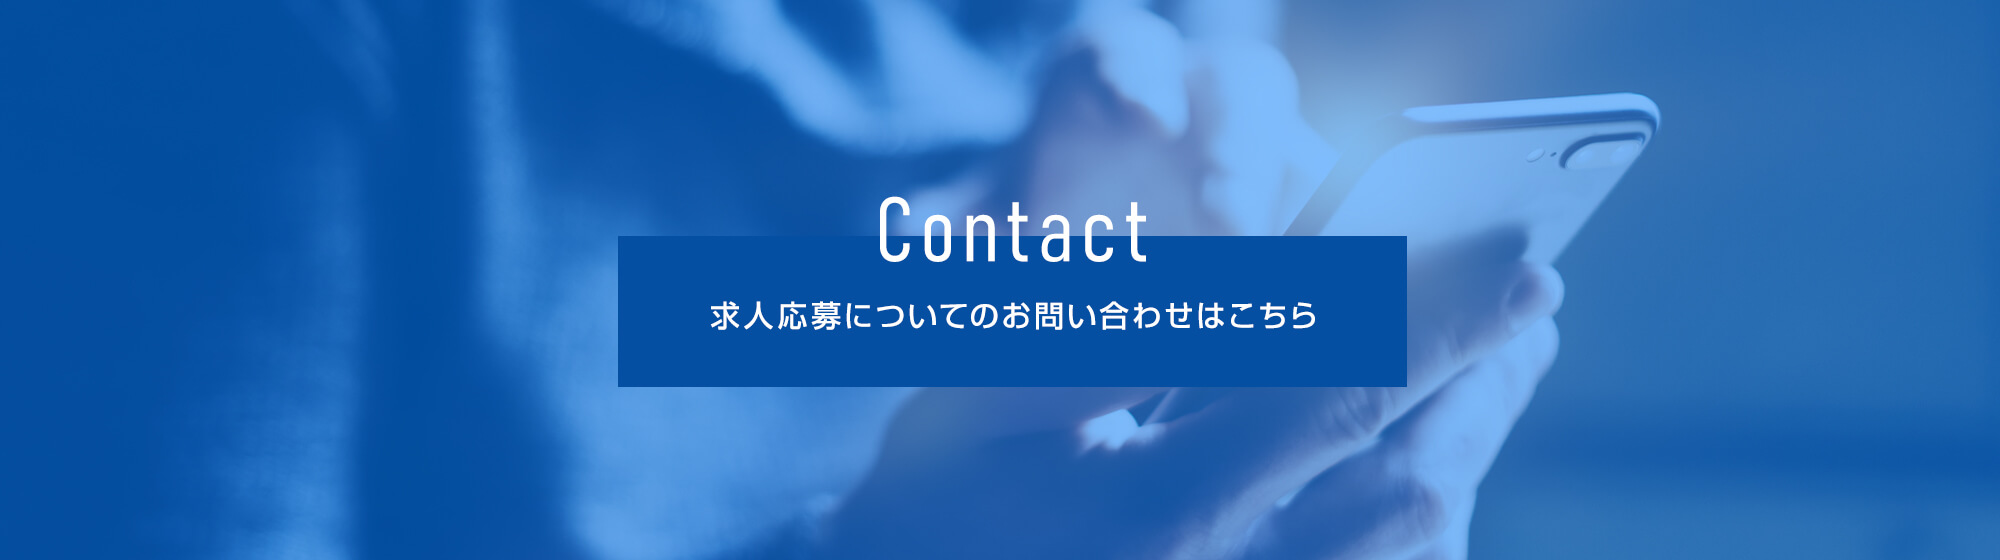 btn_contact